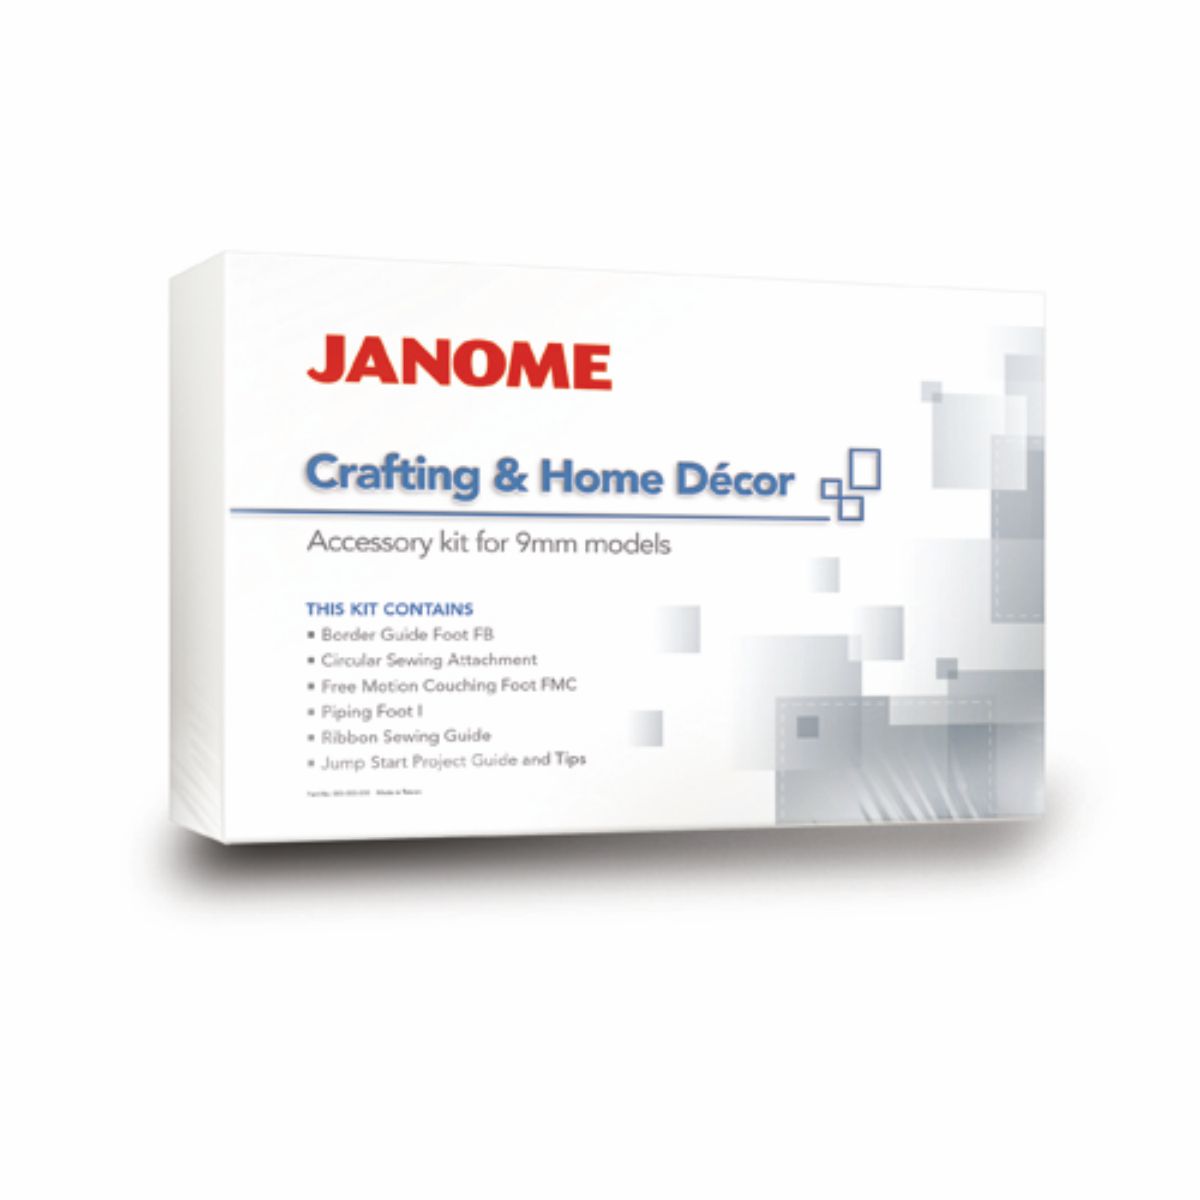 JANOME Crafting & Home Décor Kit